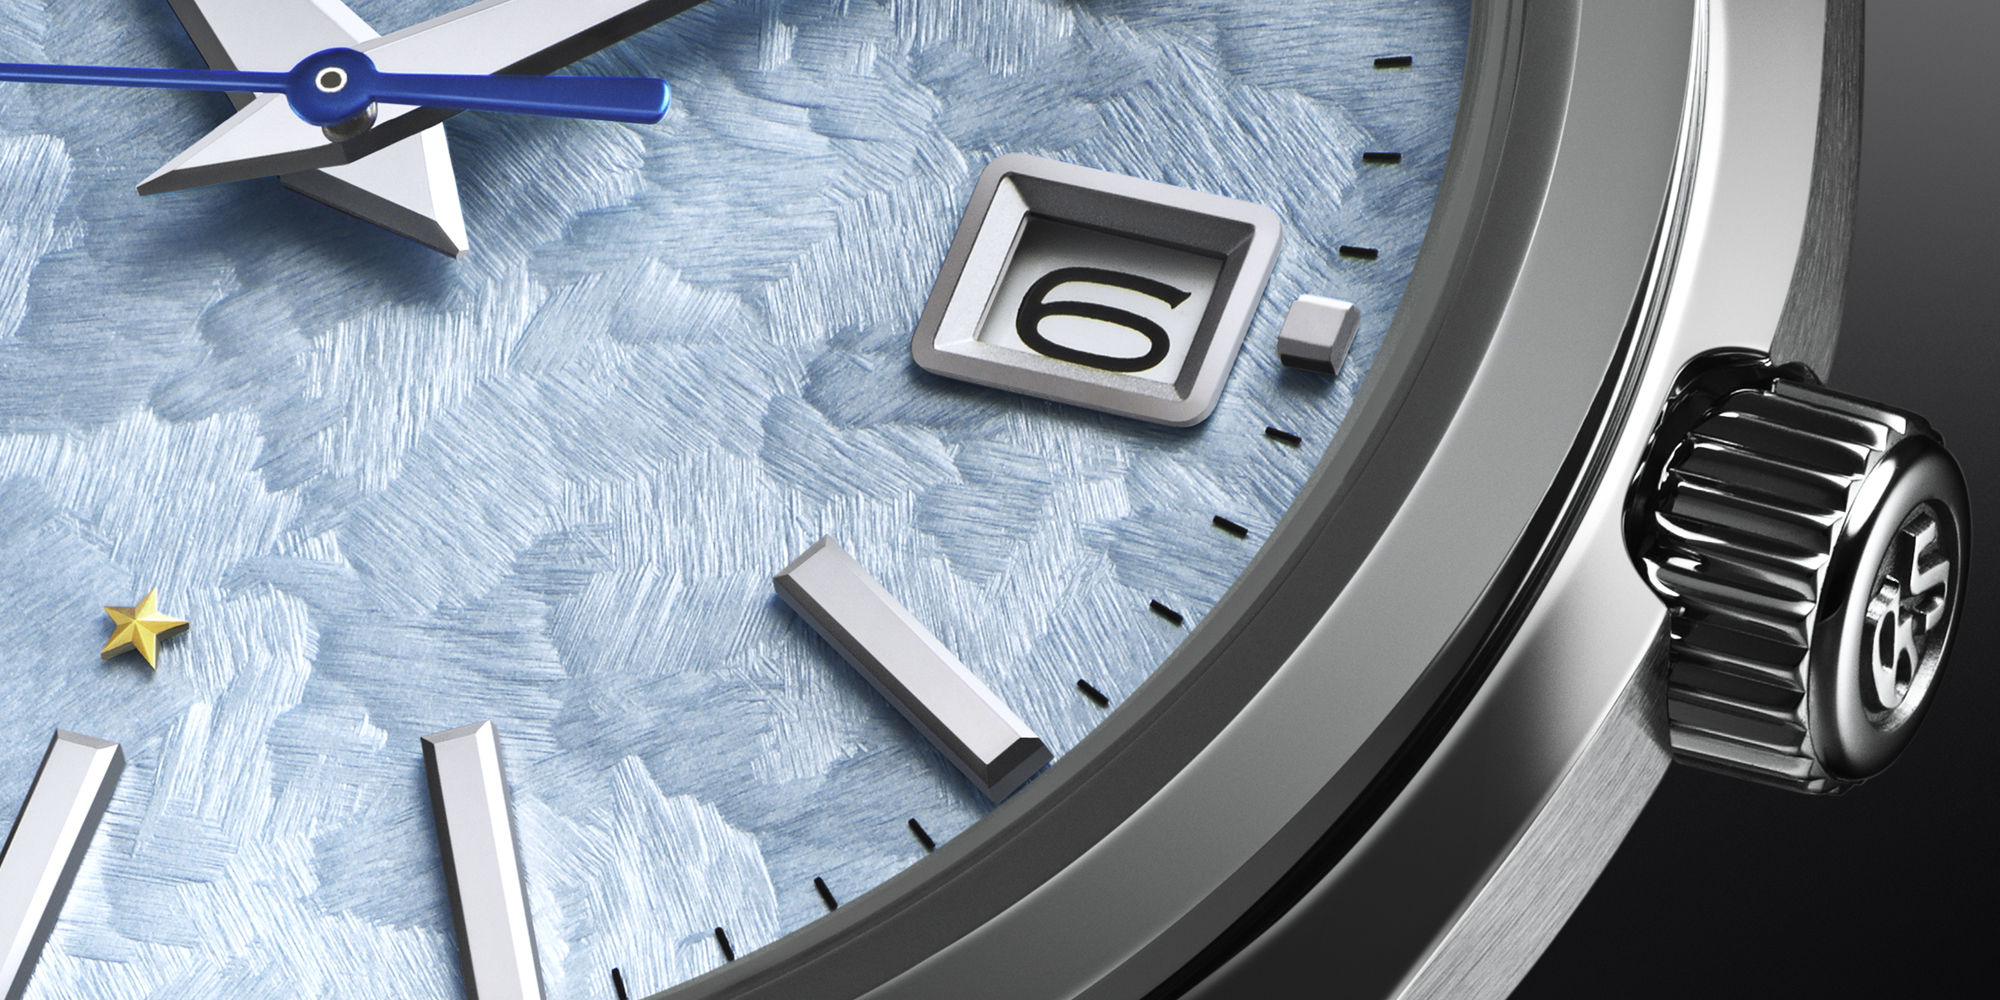 Celebrating the Grand Seiko Style and the Nature of Time with a quartz  driven Limited Edition : GS9 Club | Grand Seiko